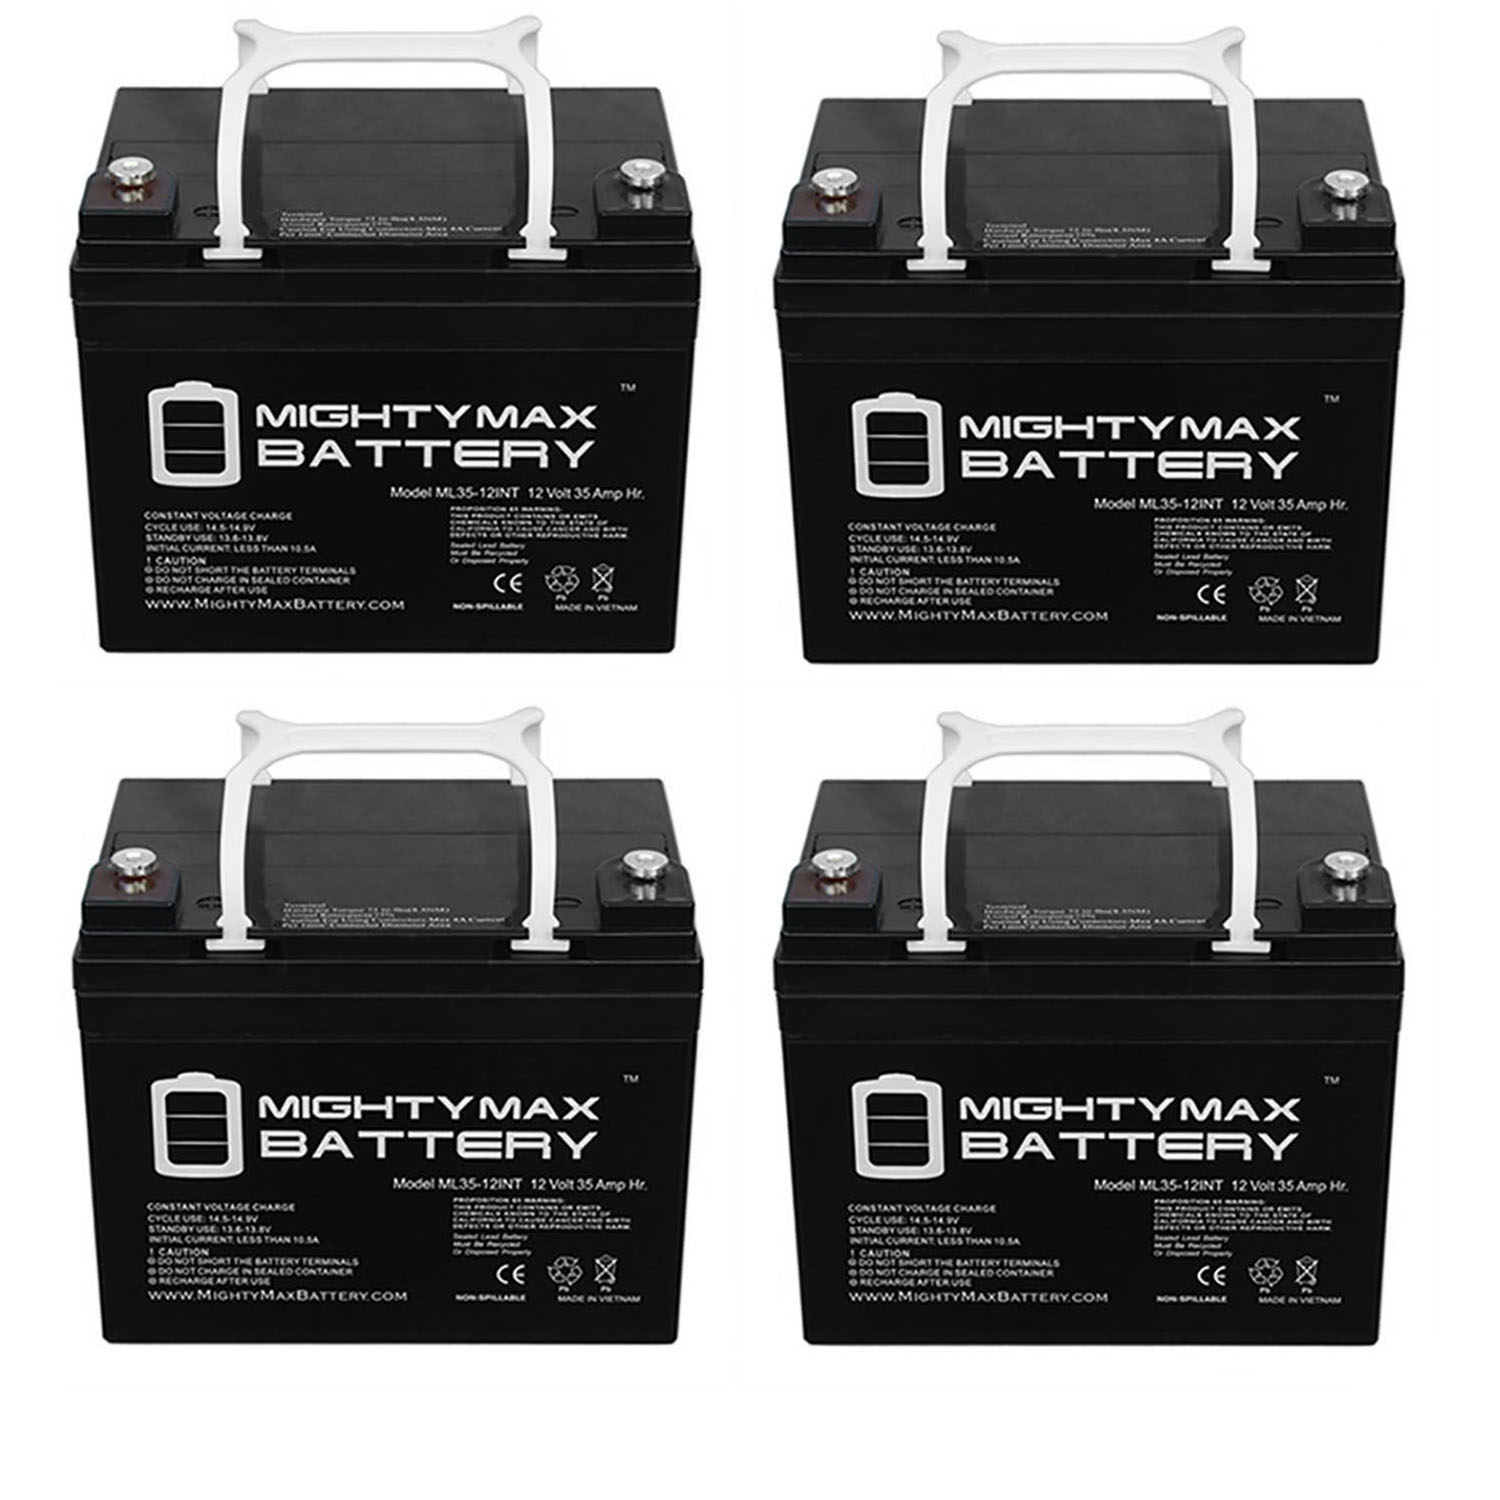 12V 35AH INT Replacement Battery for Ihc Cub Garden 602 - 4 Pack